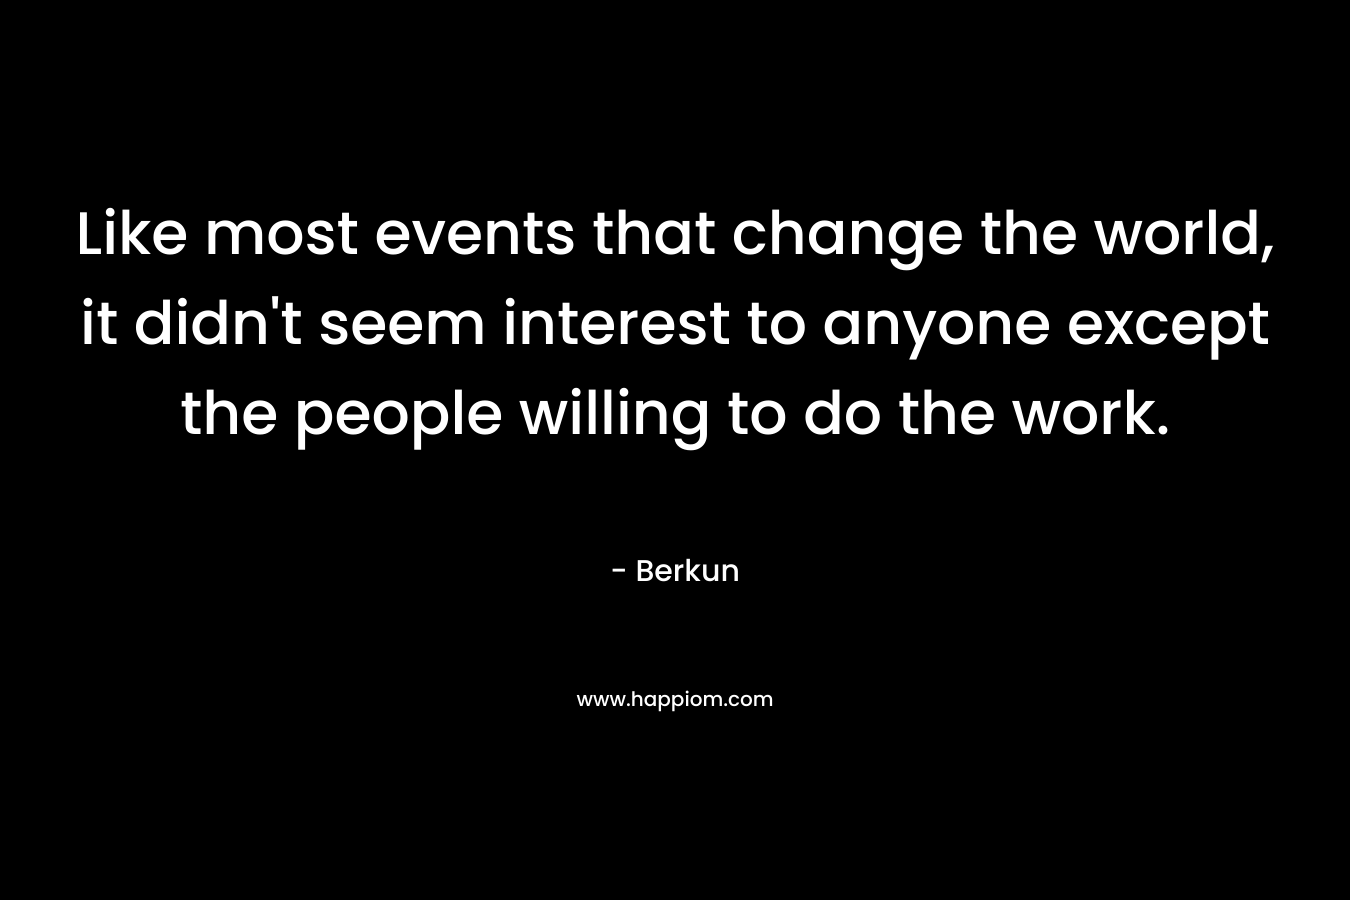 Like most events that change the world, it didn’t seem interest to anyone except the people willing to do the work. – Berkun